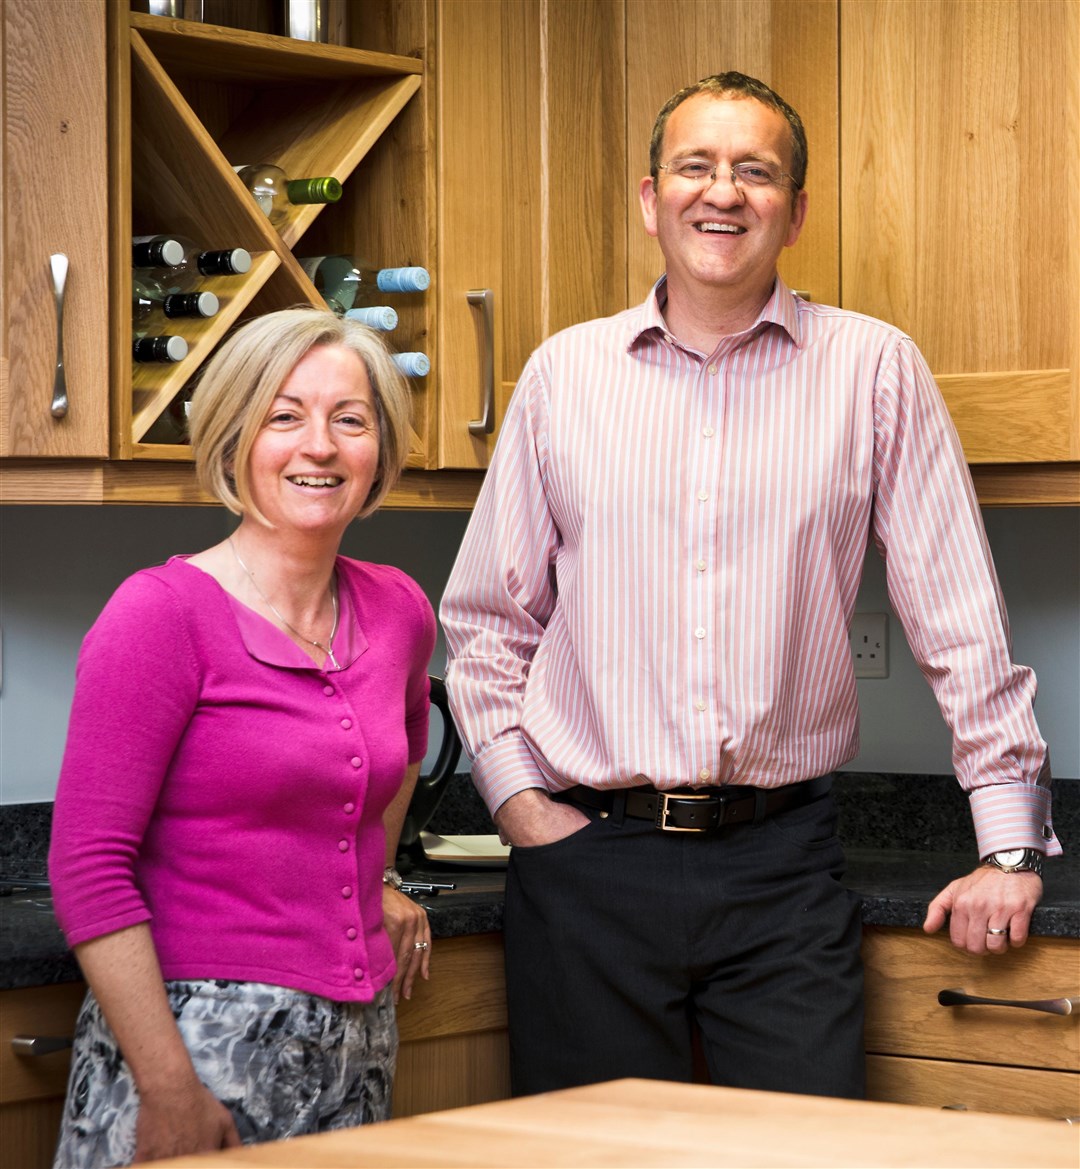 Rosemary and Duncan Shreeve whose business has been shortlisted for the prestigious awards.